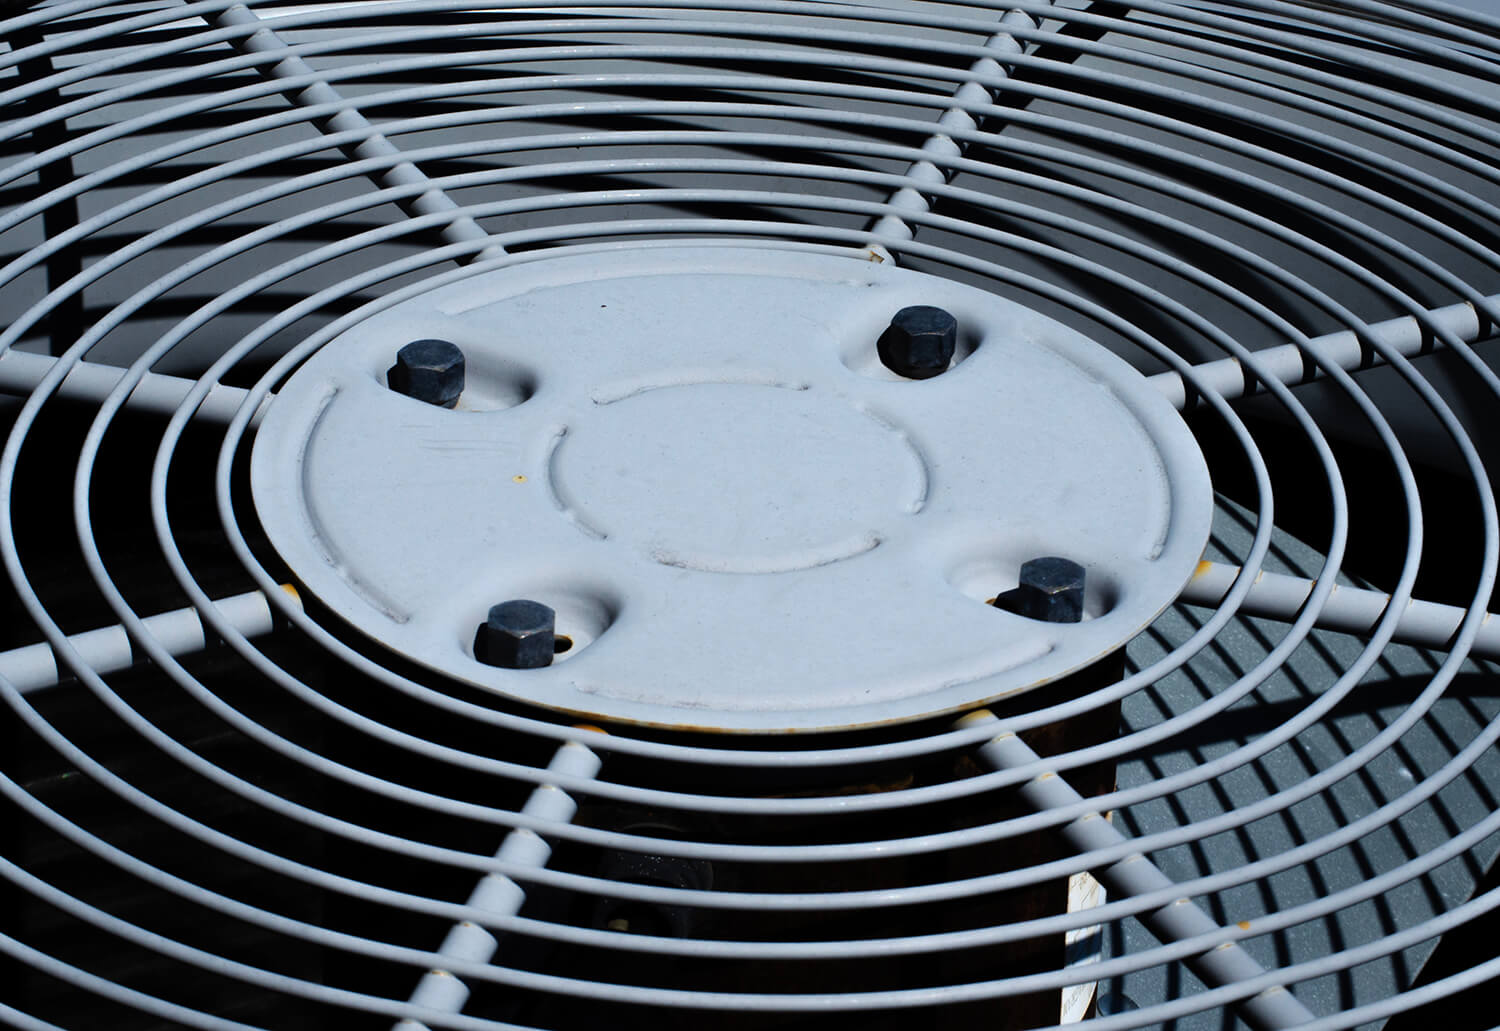 Worst sites for air conditioning to stop working